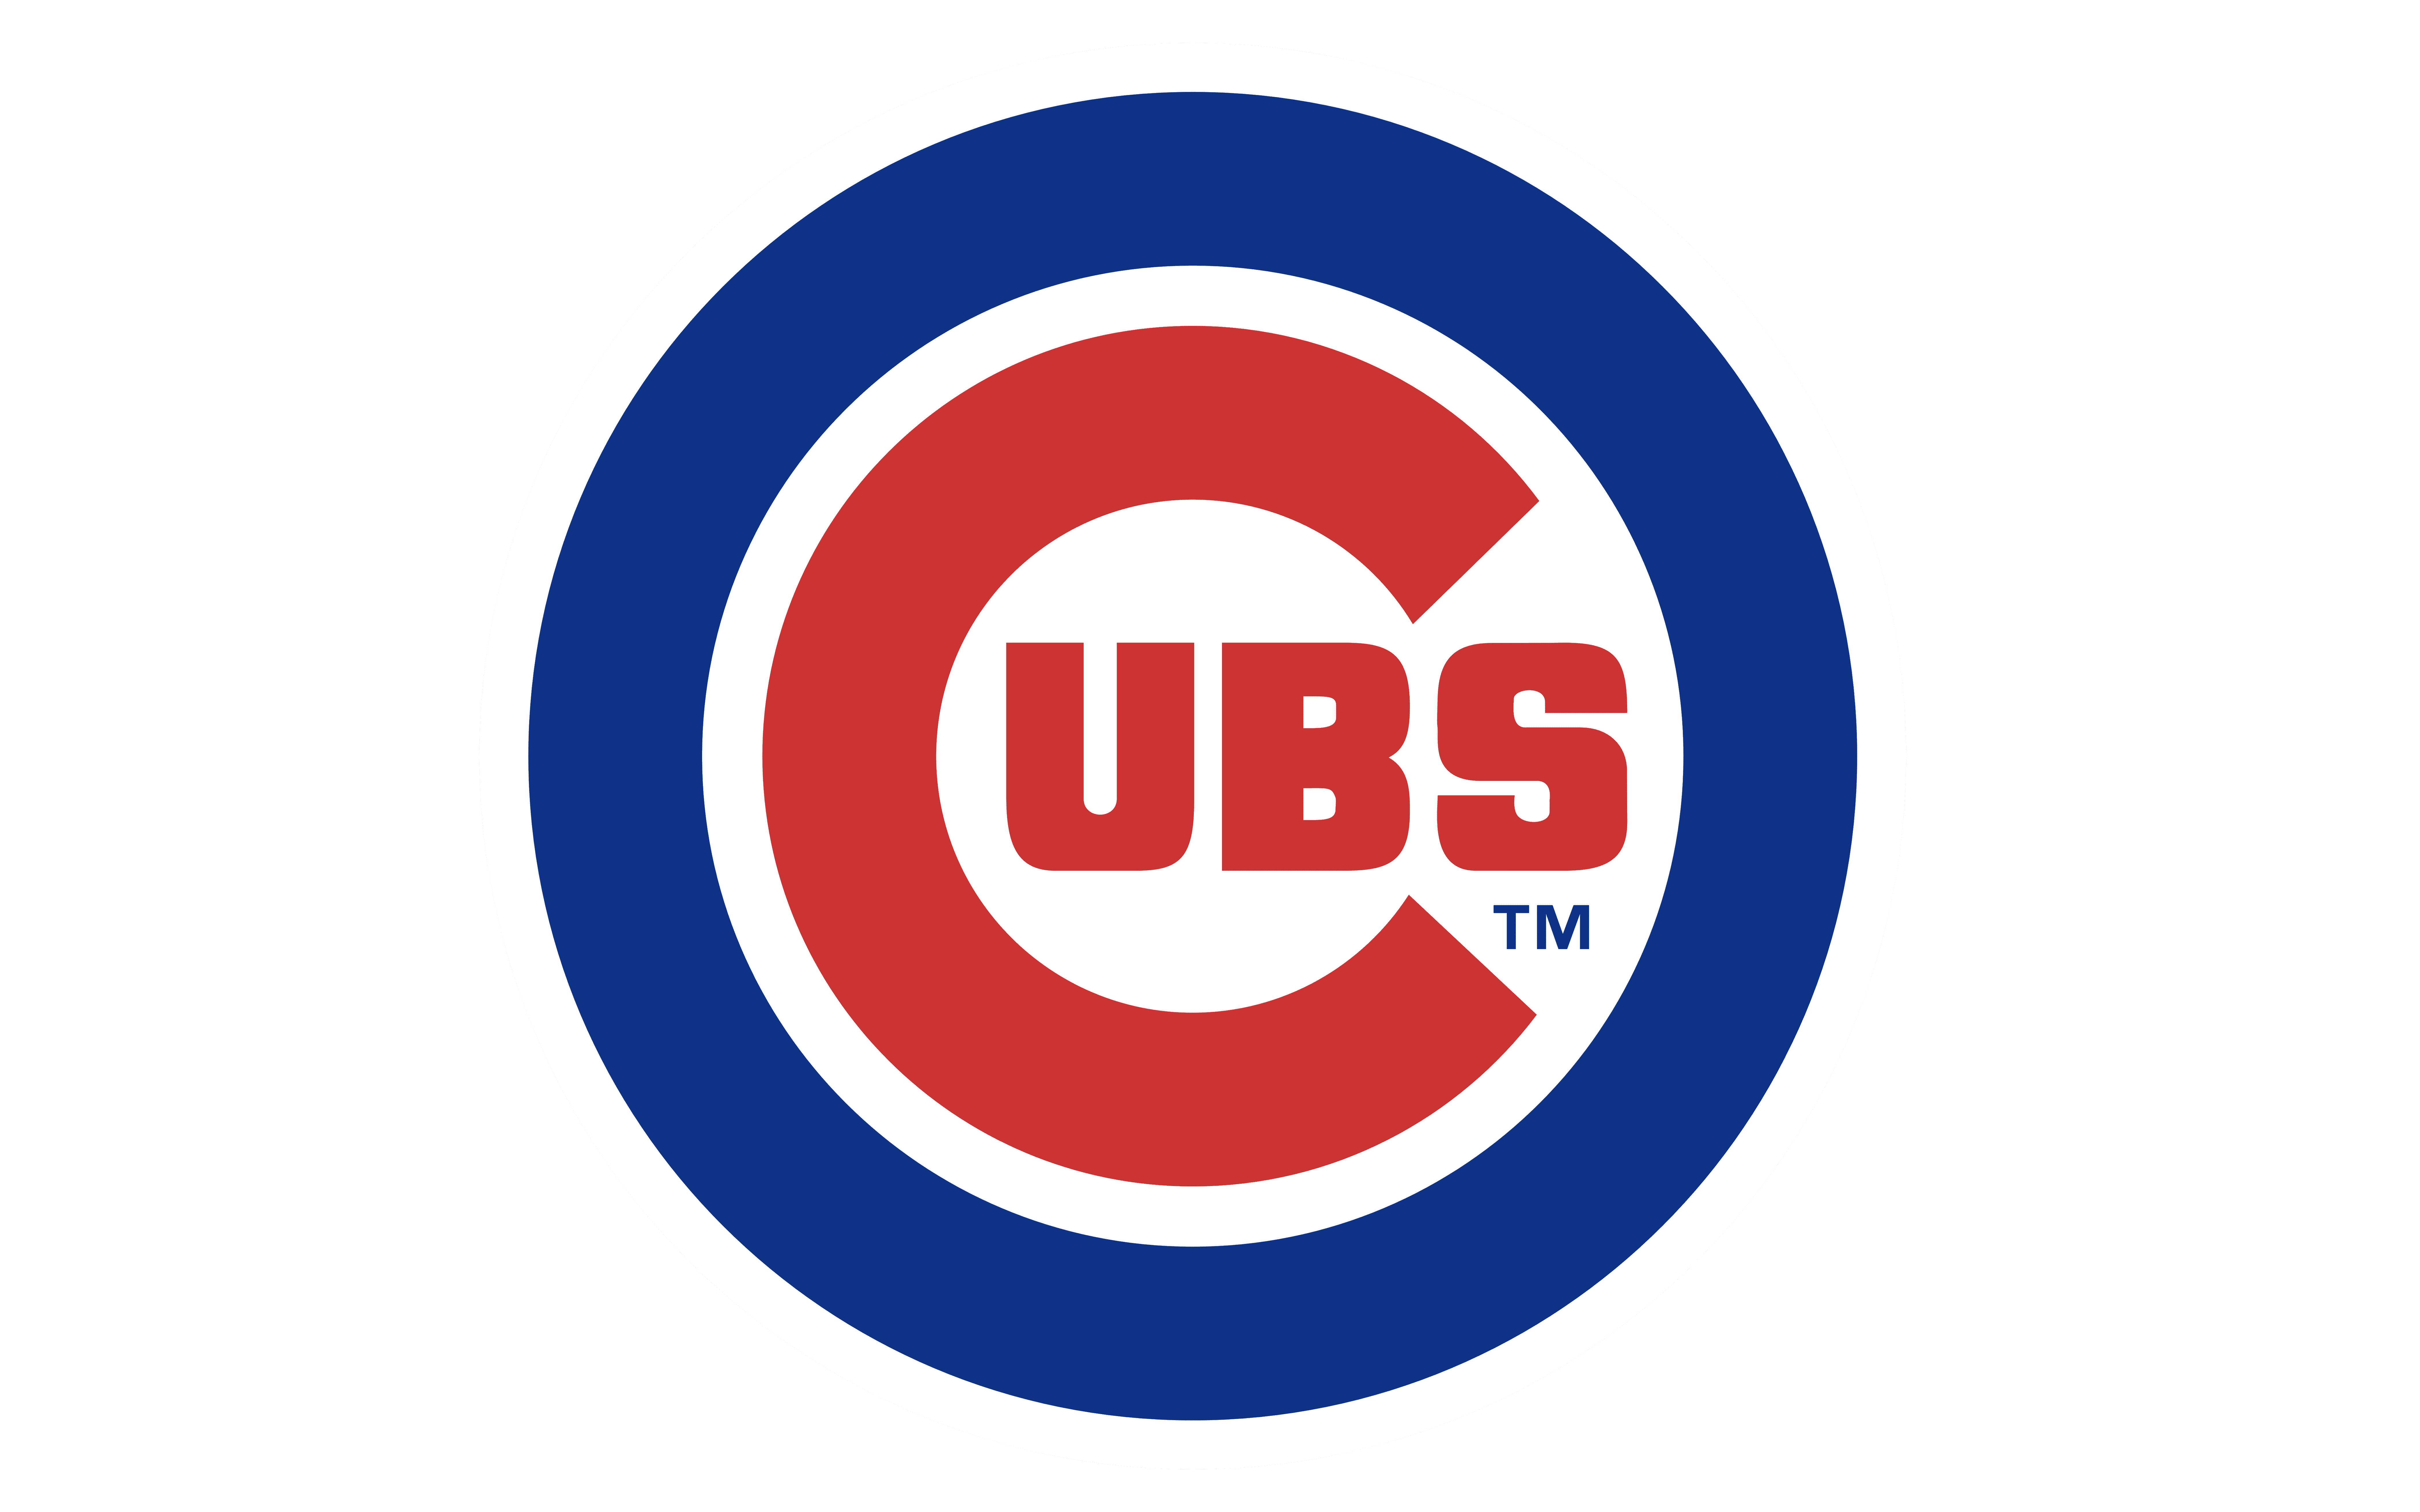 How did the Chicago Cubs logo come to be? - Quora